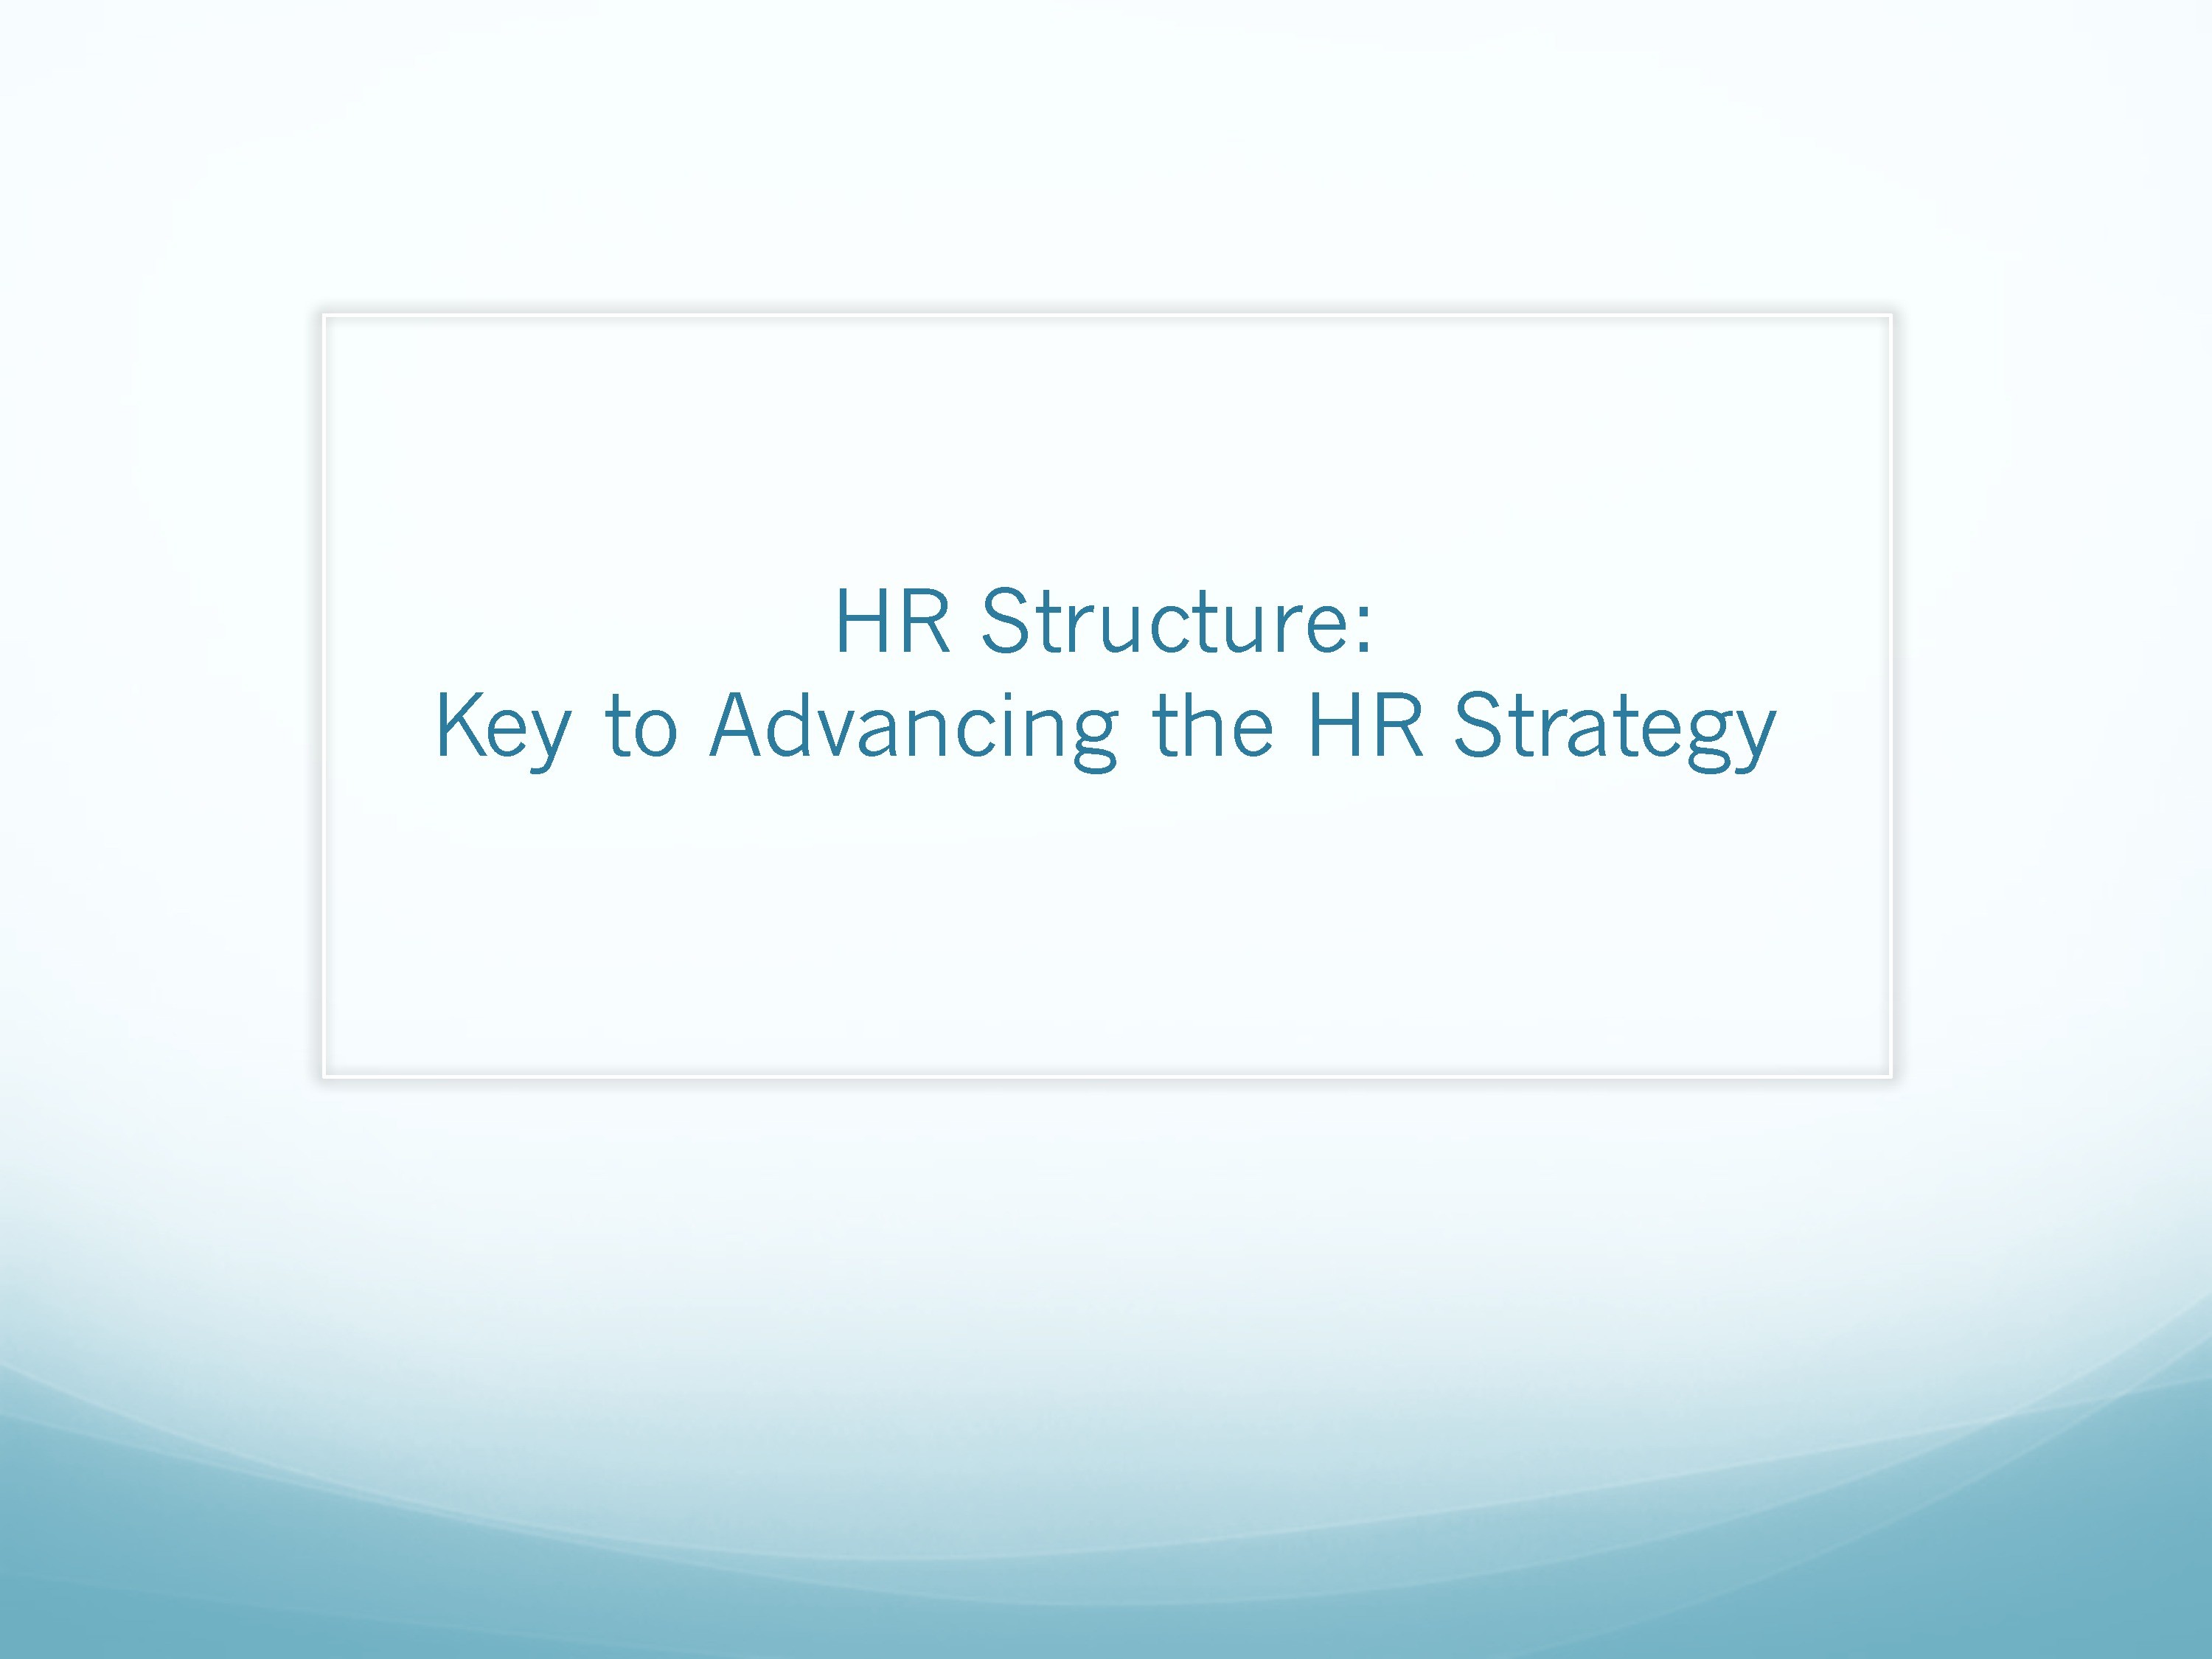 HR Structure - Key to Advancing HR Strategy